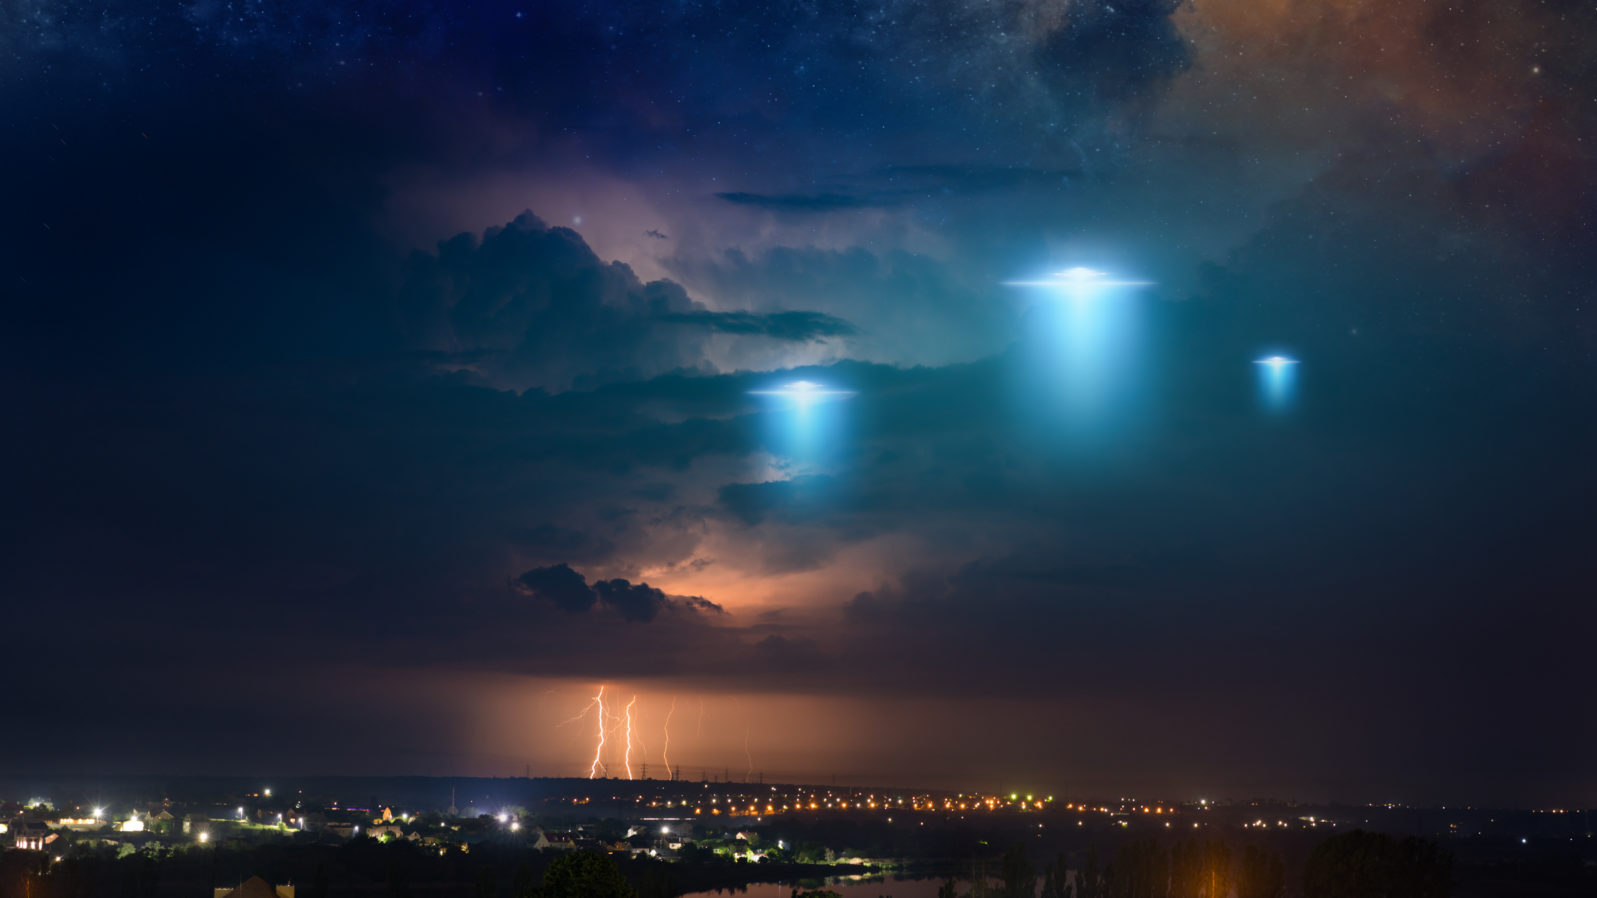 Extraterrestrial aliens spaceship fly above small town, ufo with blue spotlights in dark stormy sky.